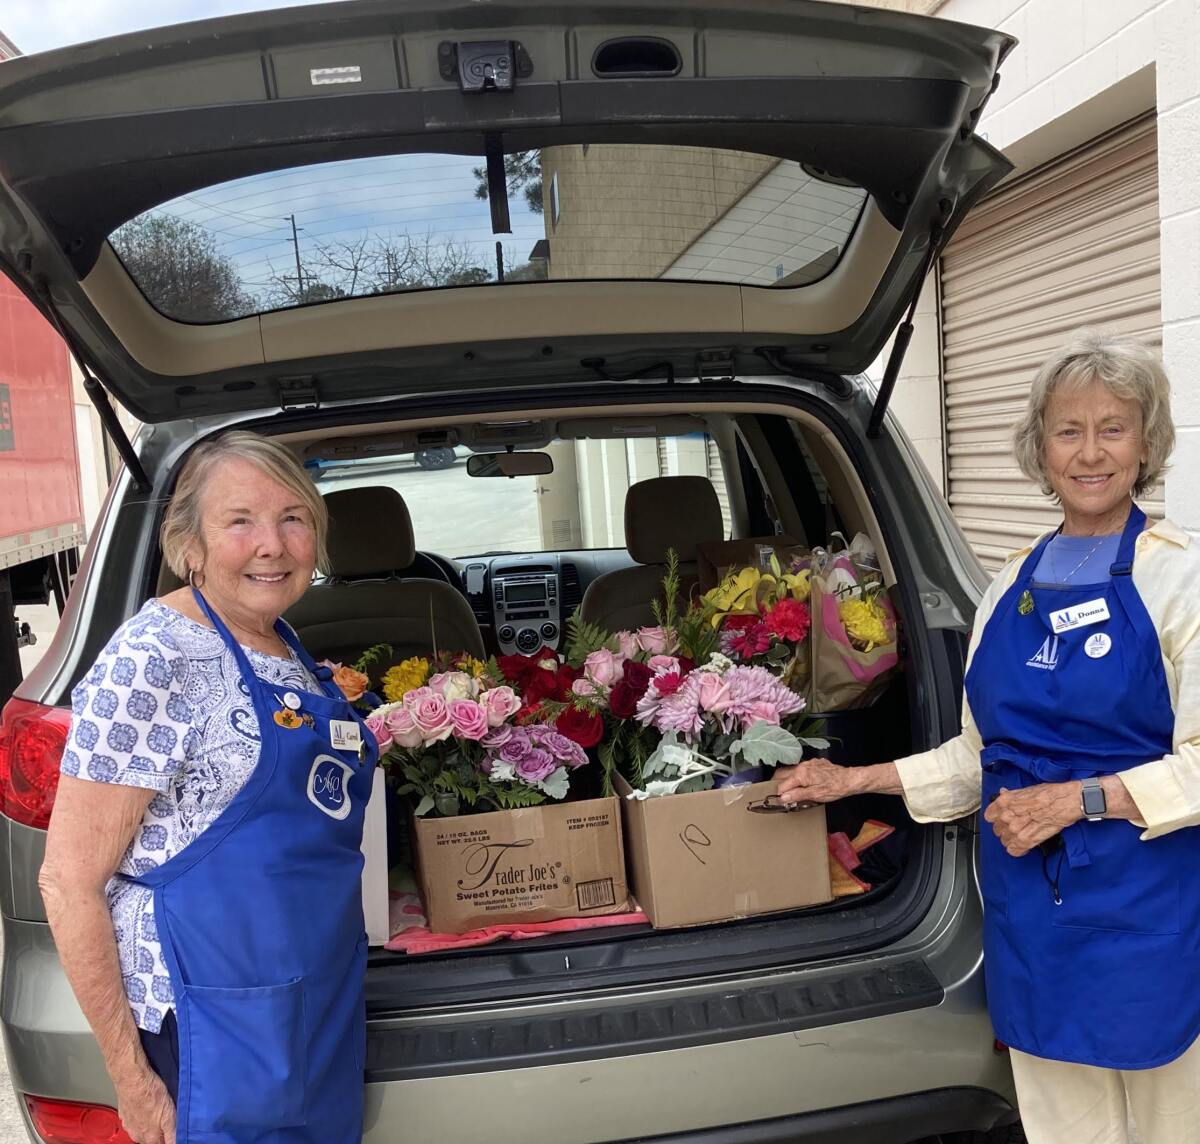 Carol Tuggey and Donna Buys load bouquets for delivery